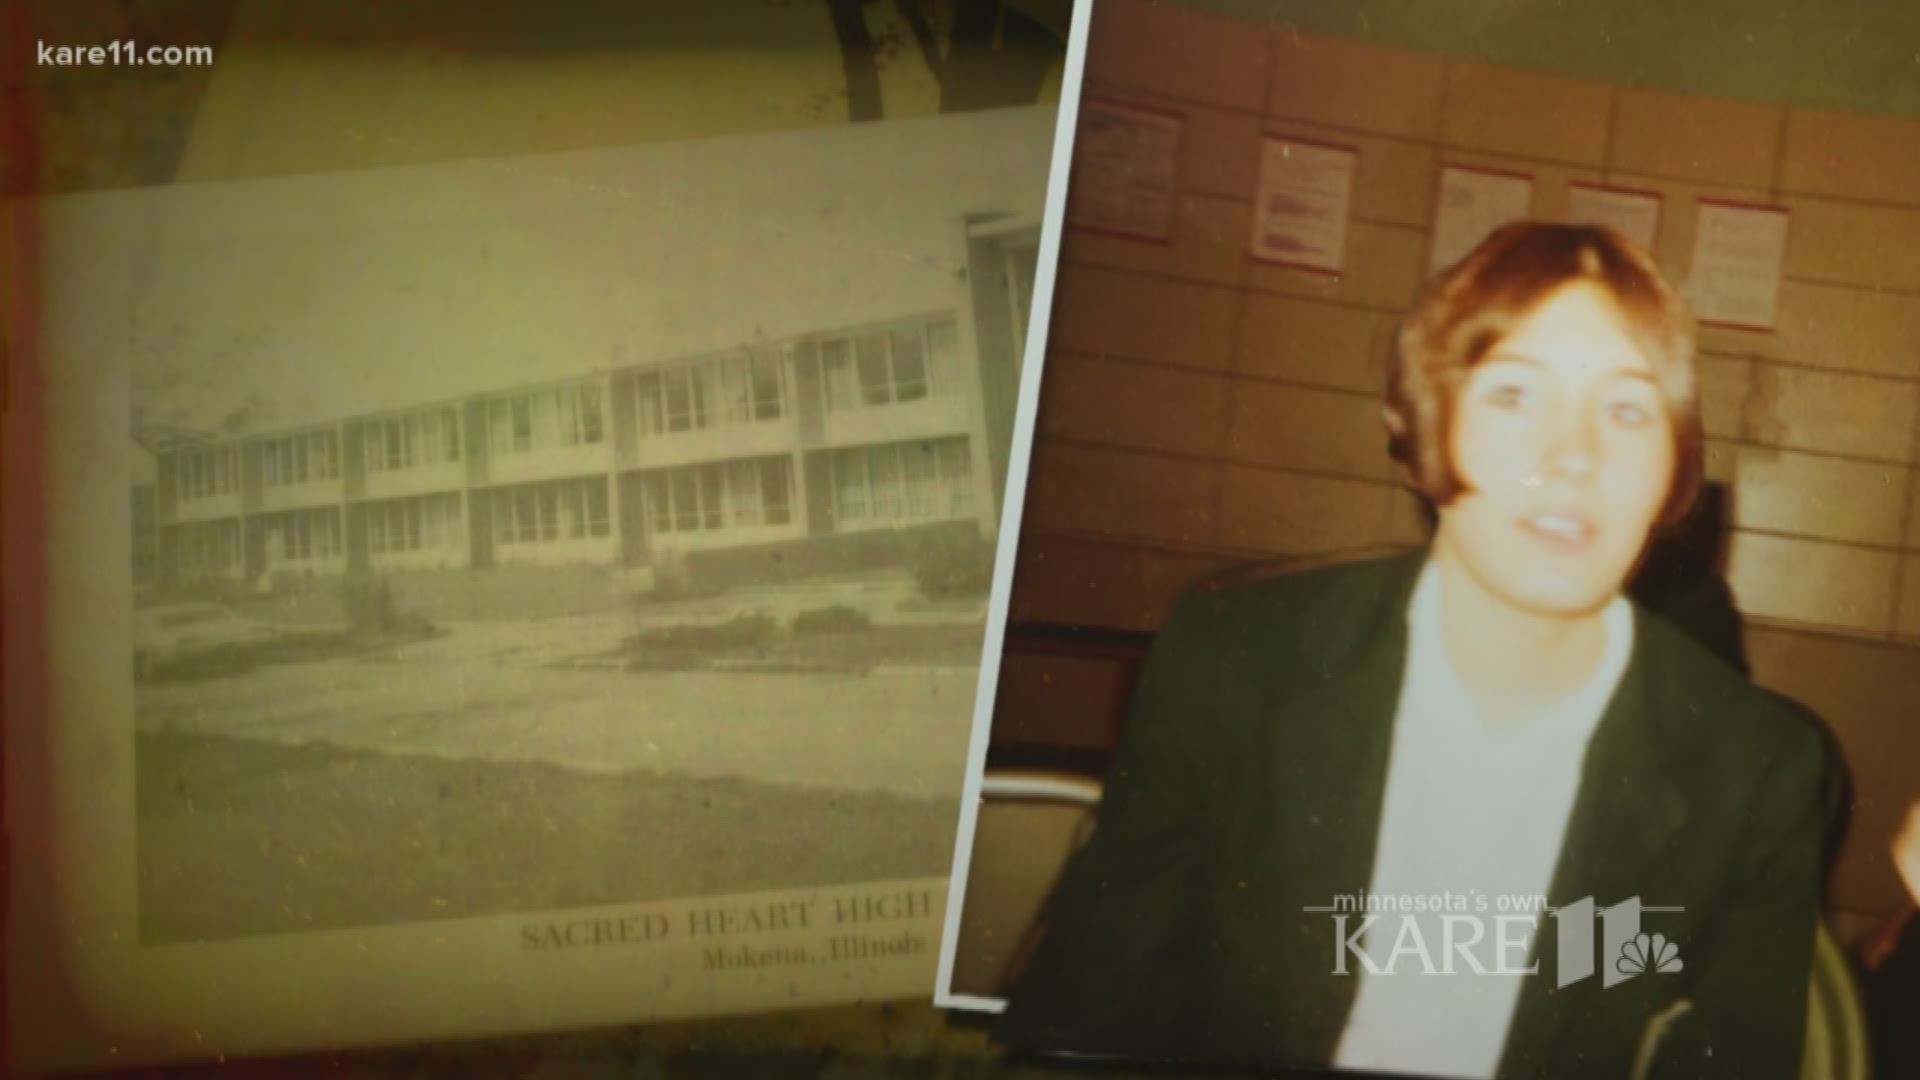 They called it the "baby scoop era" -- a time when unwed mothers were separated from their newborn children, without their consent. This is the story of one mother looking for her son decades later. http://kare11.tv/2CMbRcf